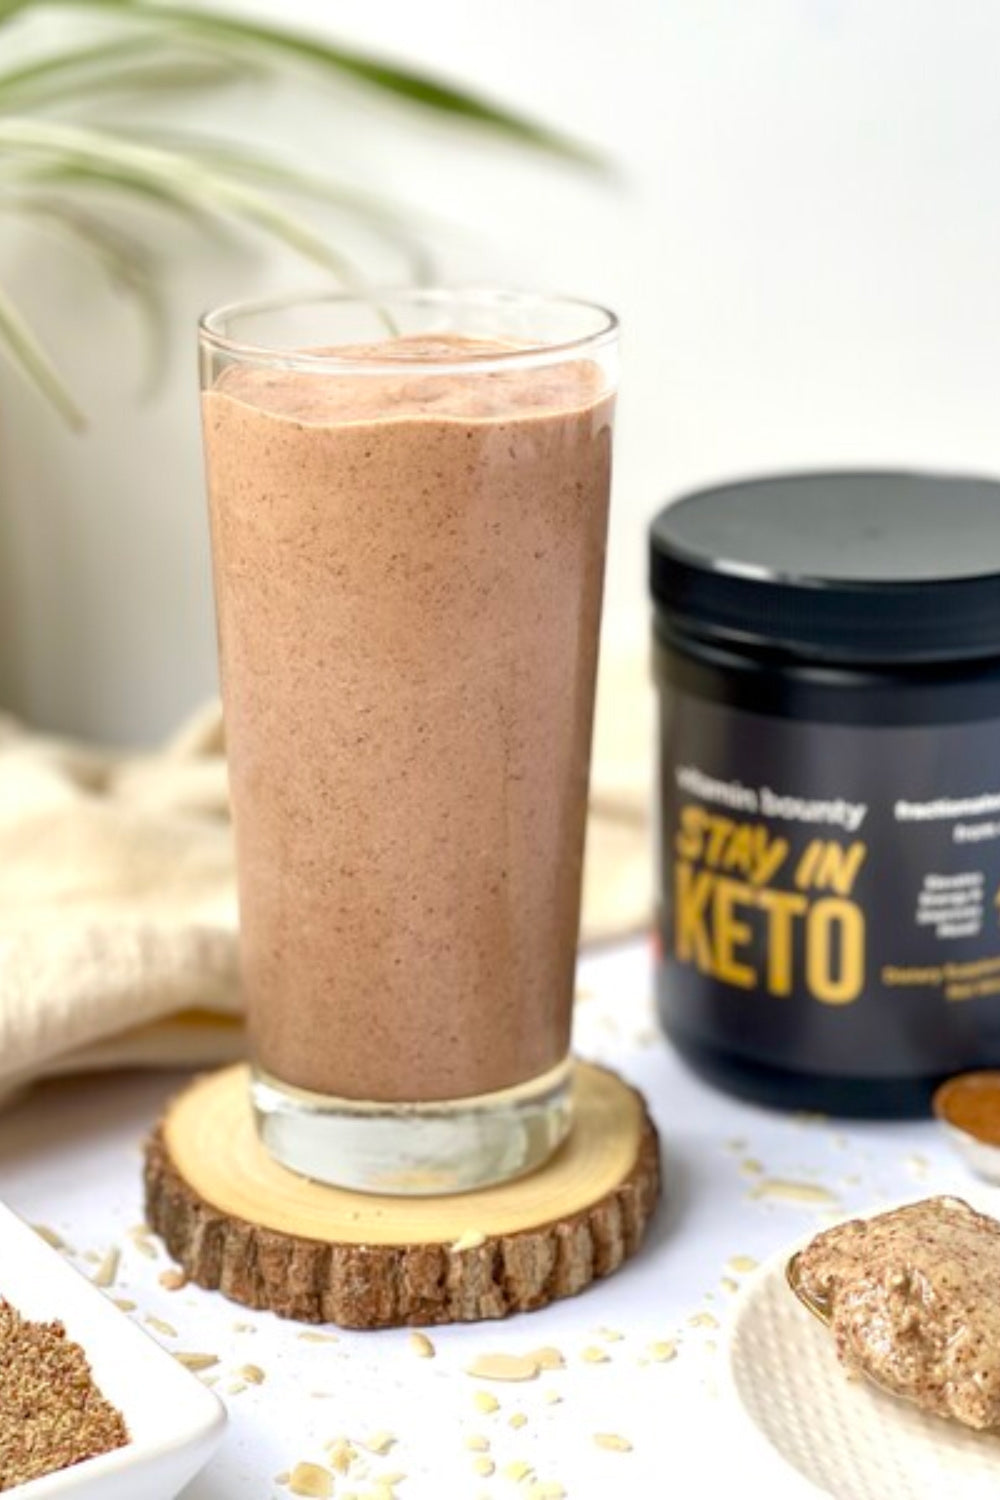 Stay in keto Almond Butter Cinnamon Smoothie, pictured in a tall glass